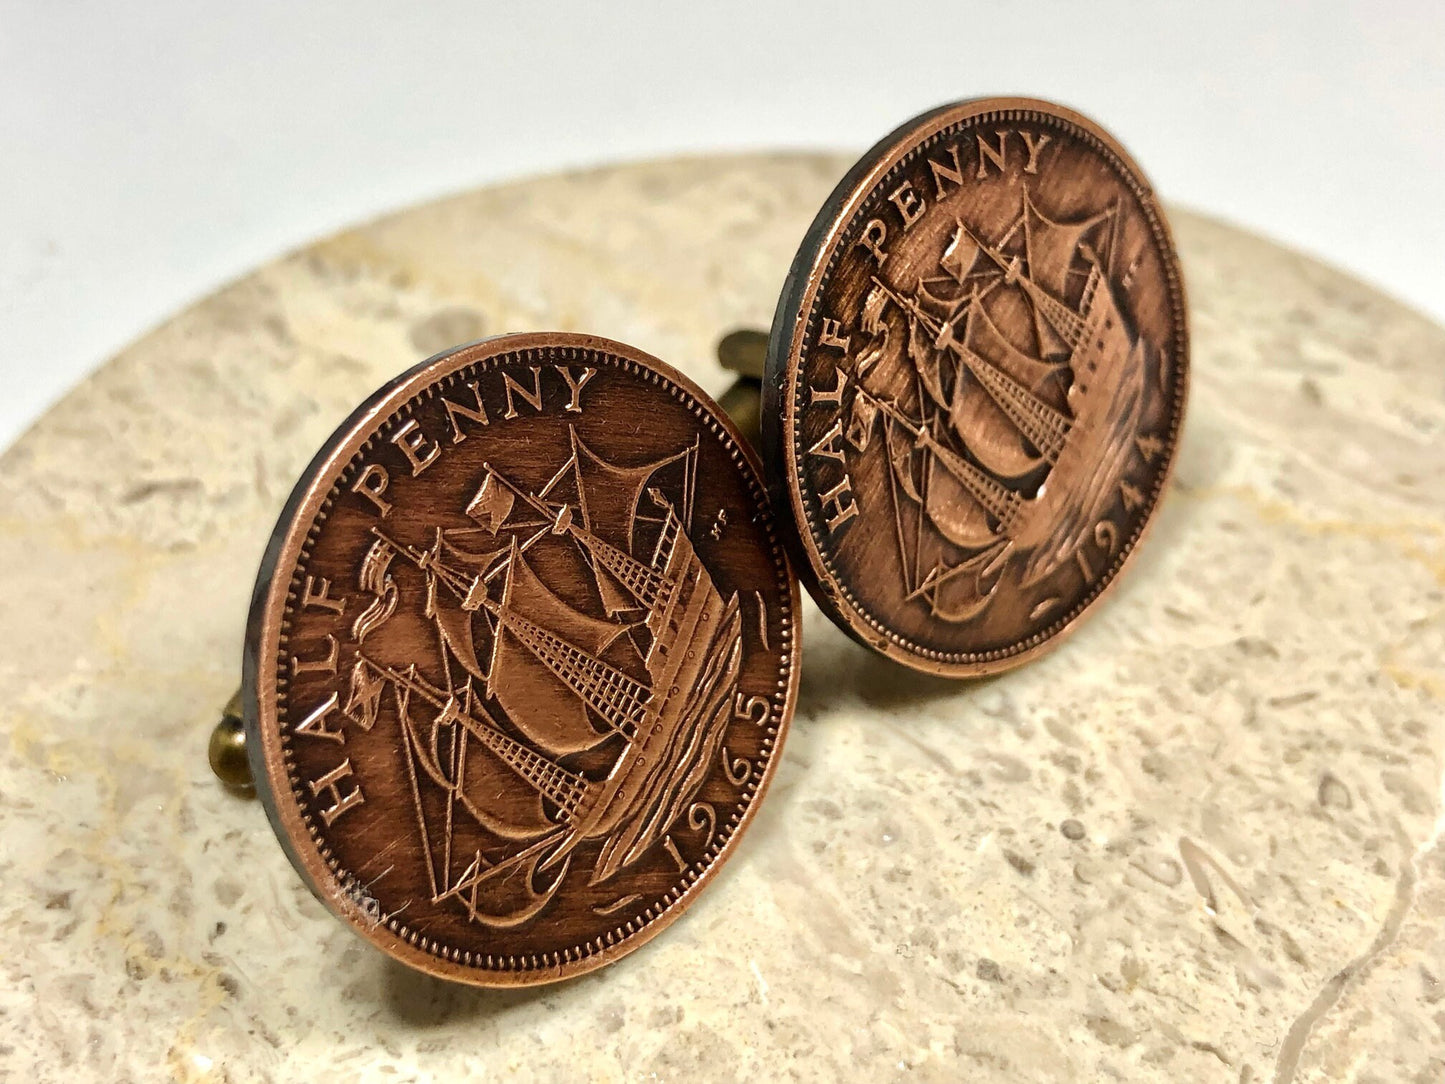 Britain Coin Cuff Links British Half Penny United Kingdom Custom Made Vintage and Rare coins - Coin Enthusiast - Suit and Tie Accessory